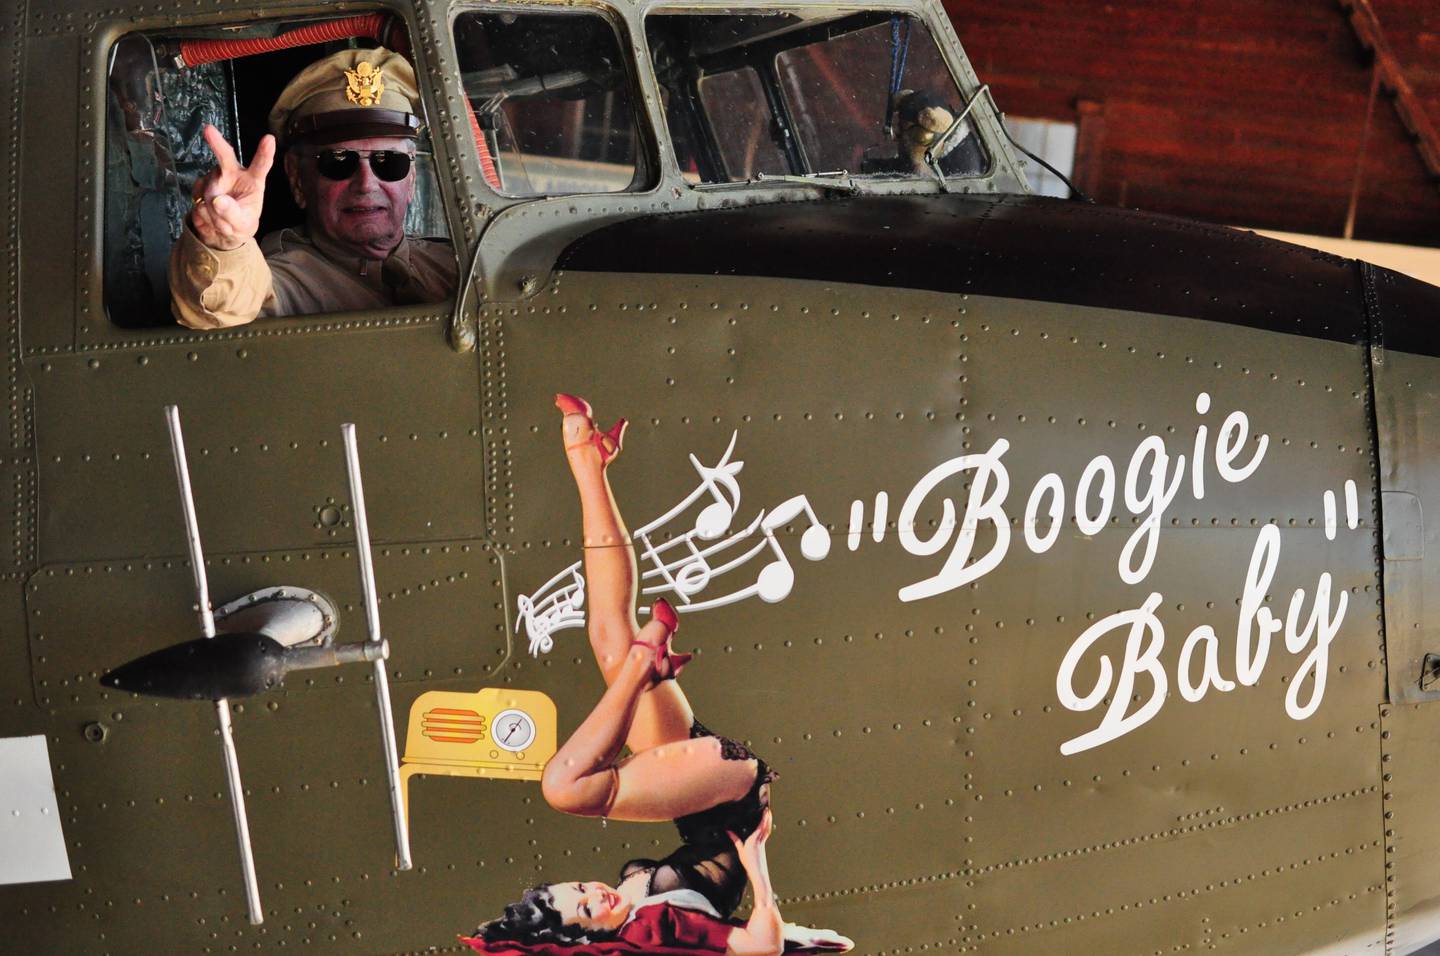 D-Day Pathfinder pilot Lt. Col. David Hamilton in the cockpit of the C-47 transport plane  "Boogie Baby."